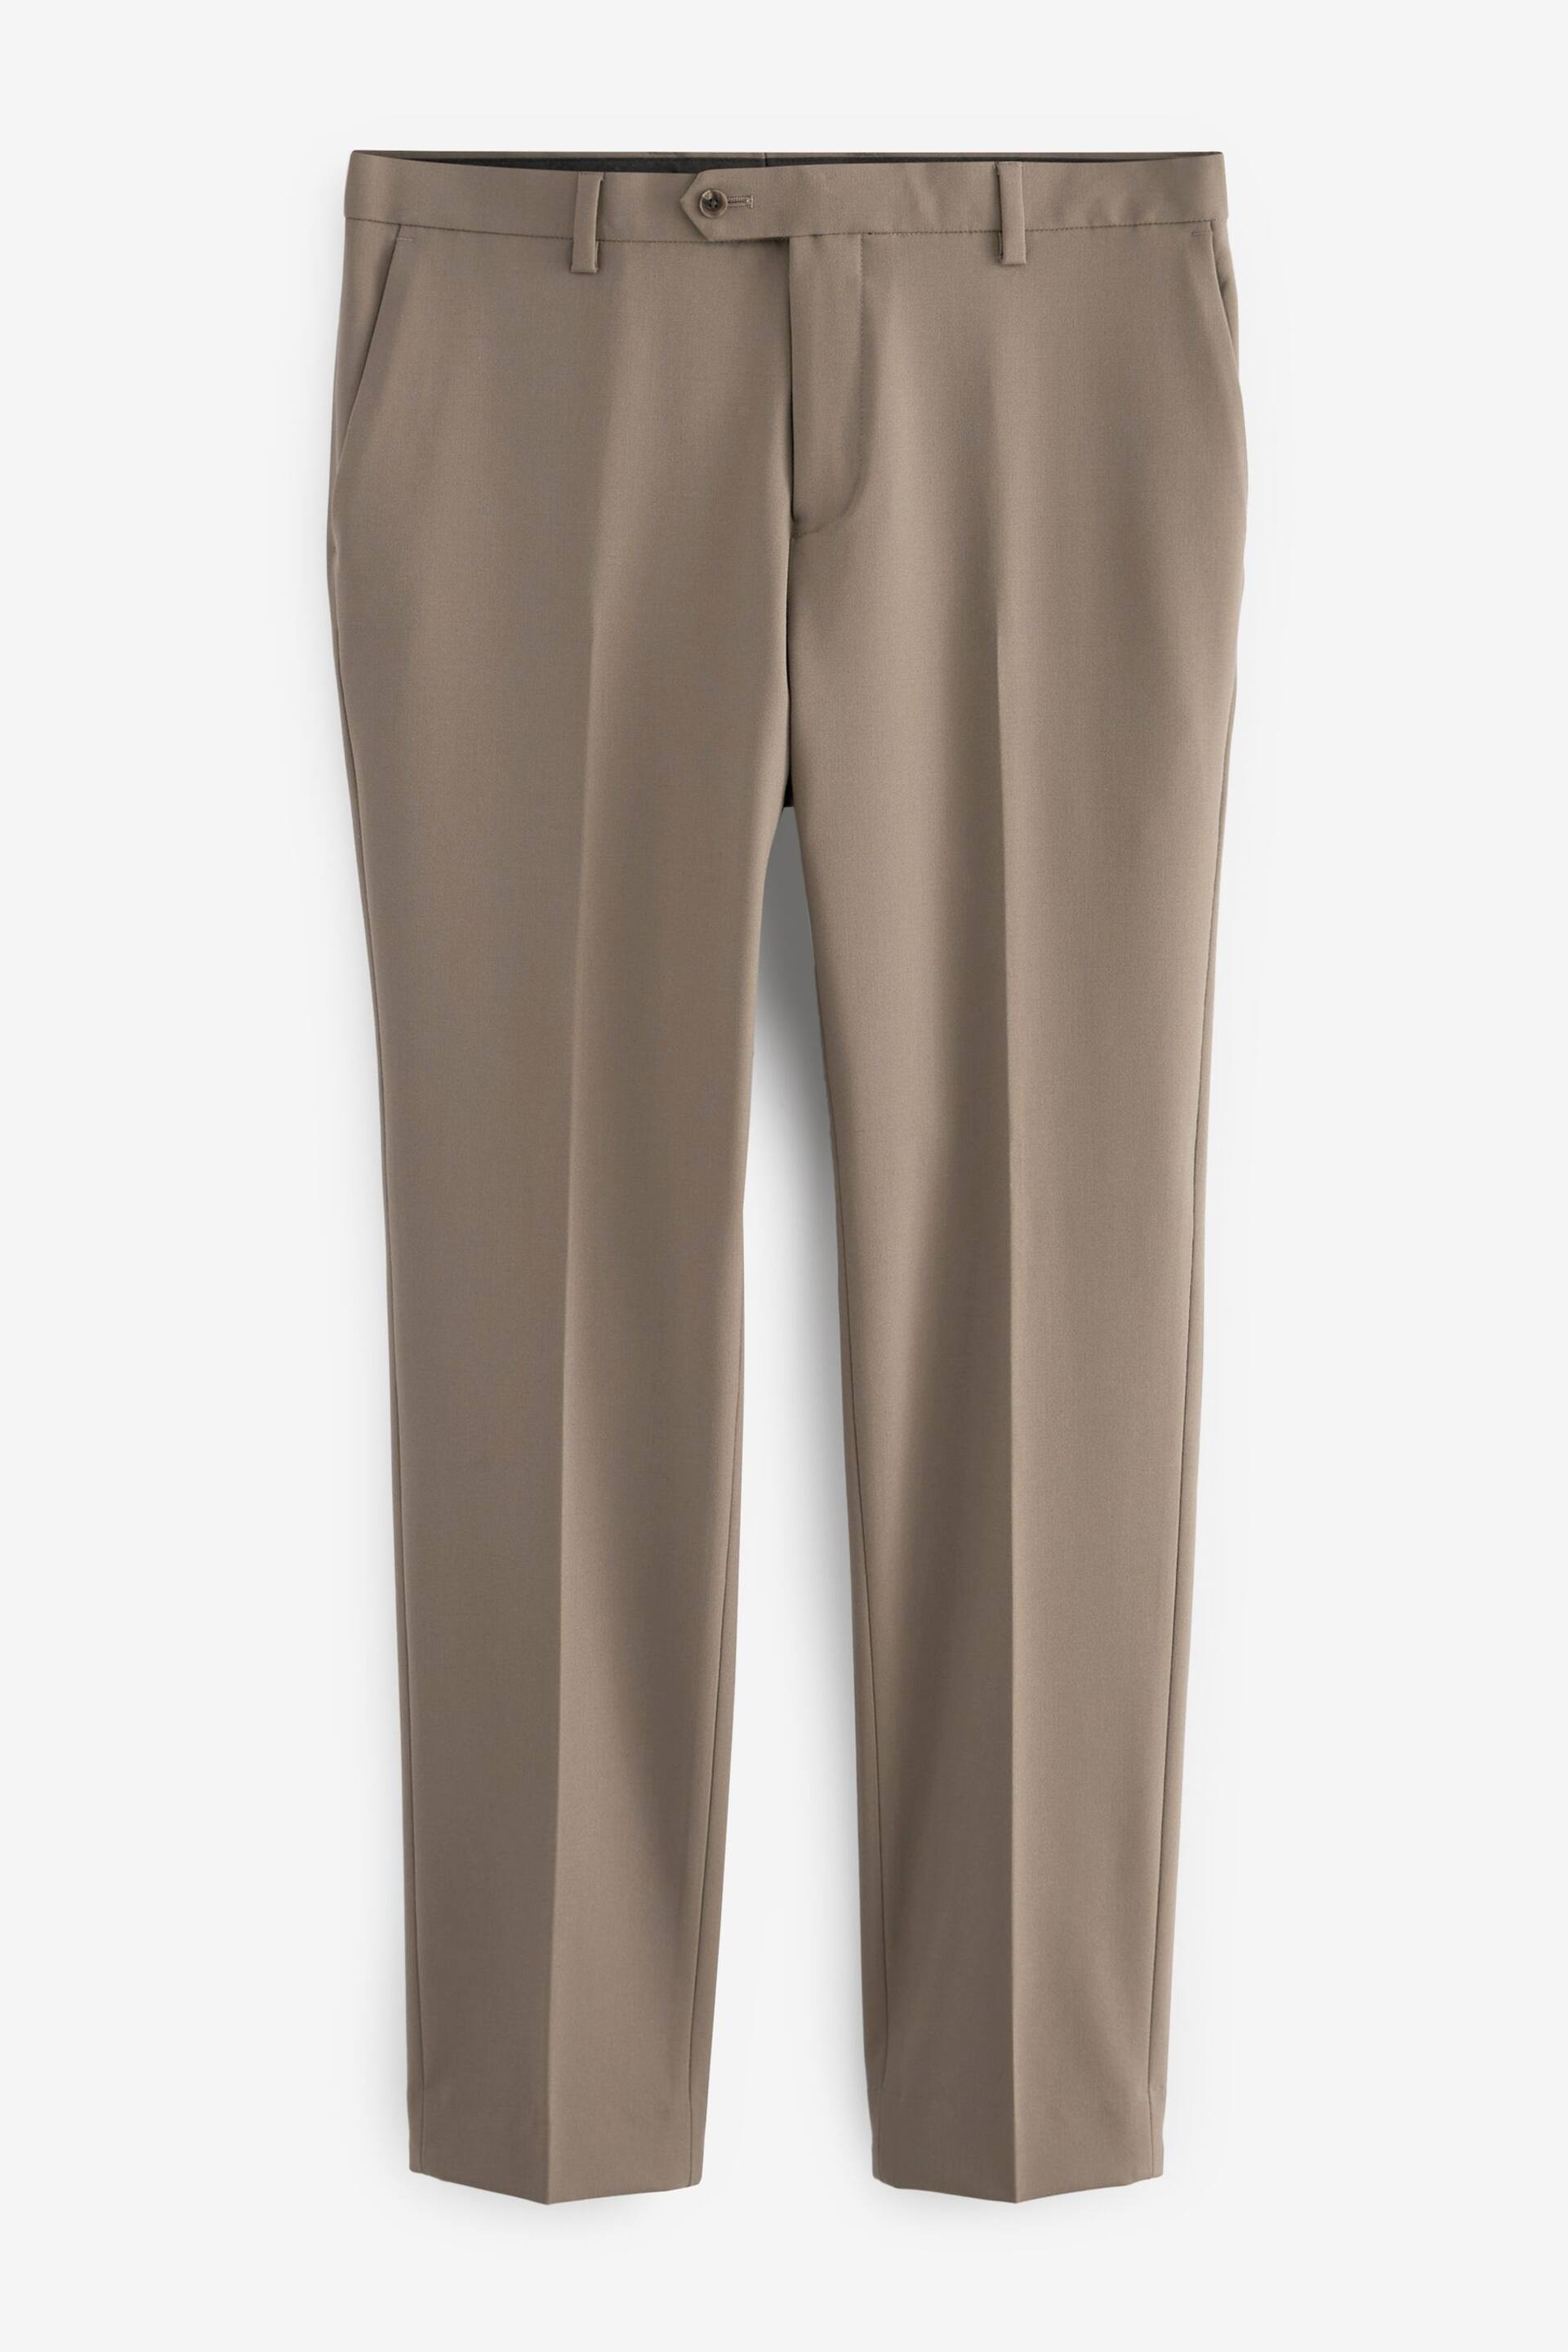 Taupe Skinny Fit Motionflex Stretch Suit: Trousers - Image 6 of 11